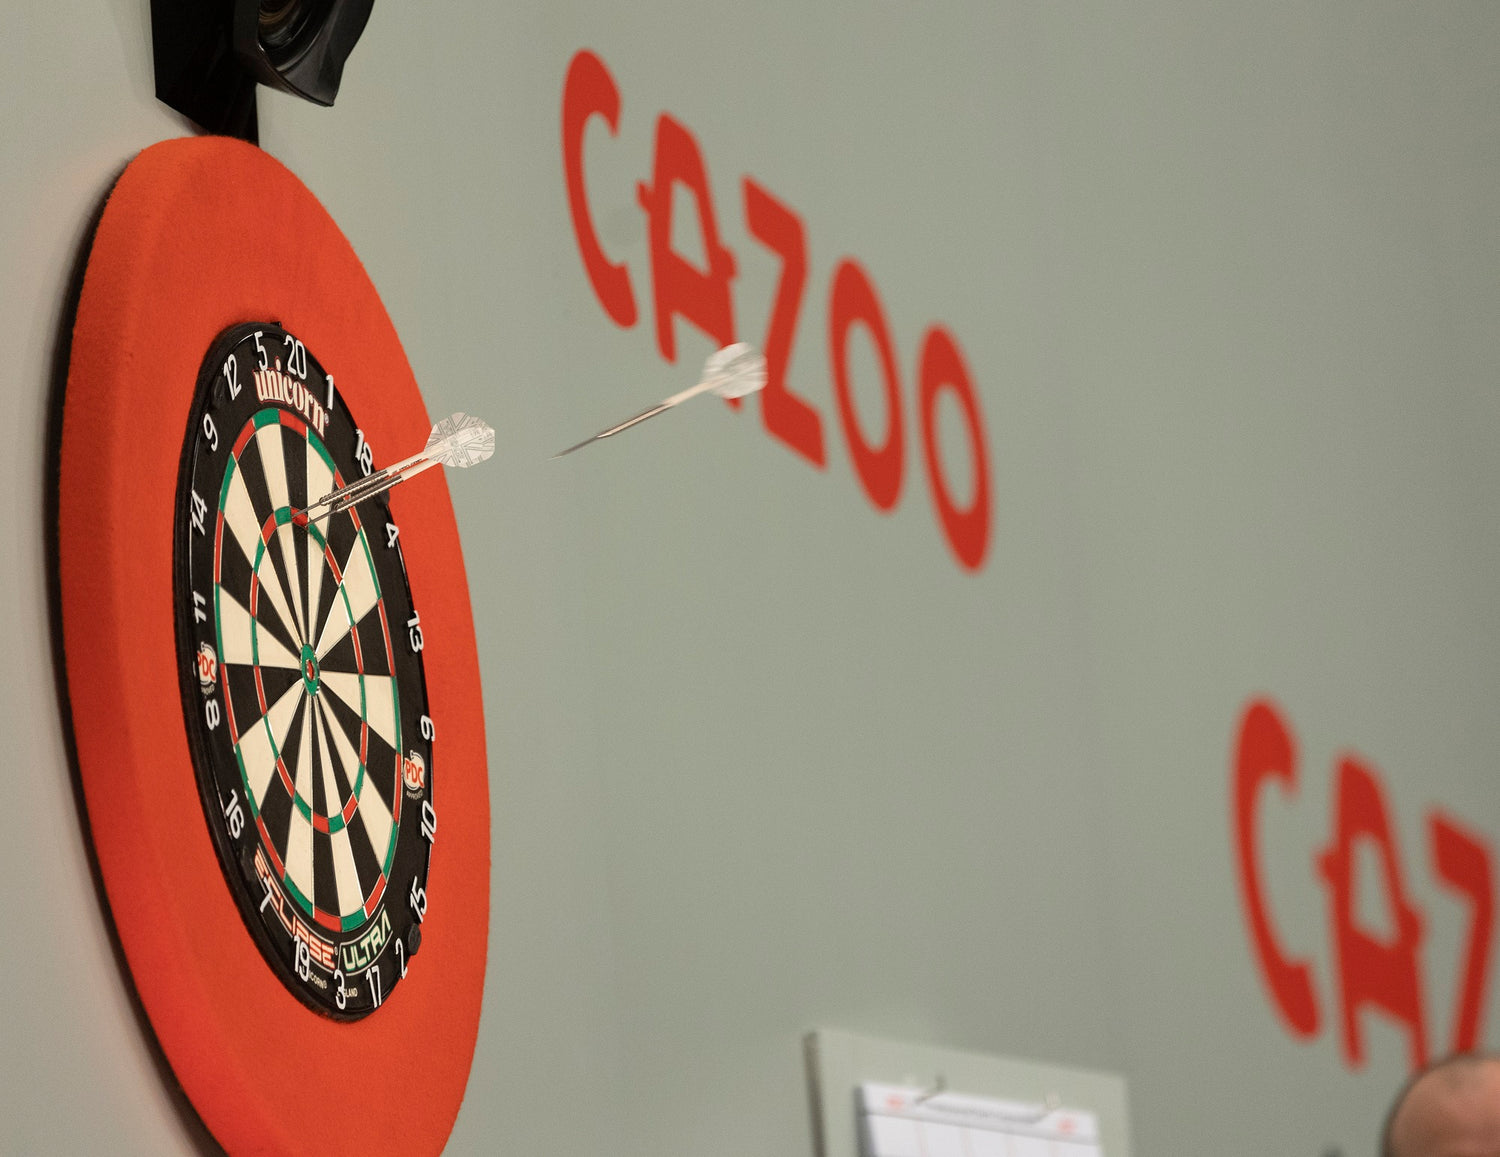 2022 PDC Qualifying School final entries, exemptions & info confirmed